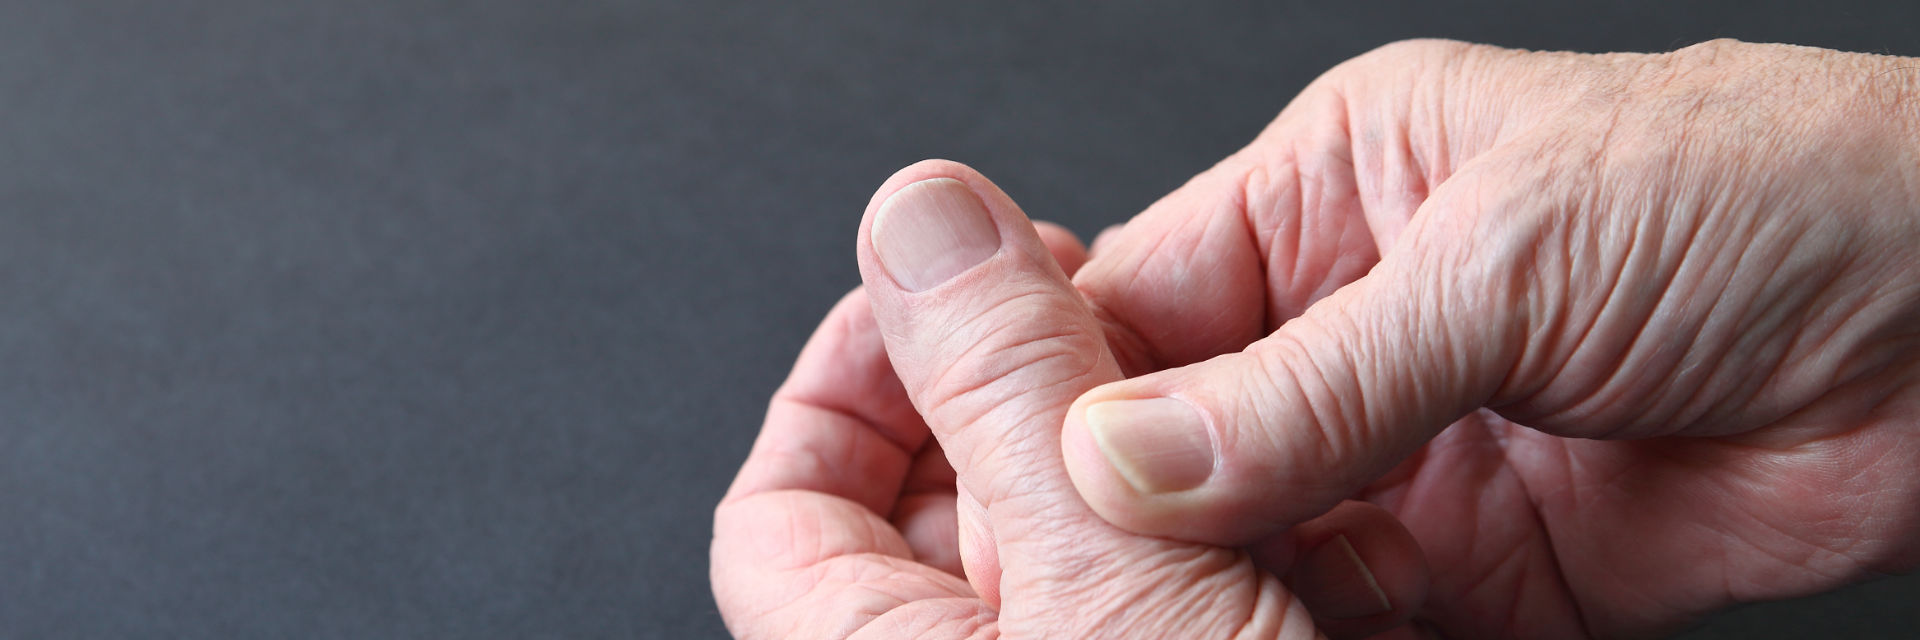 Elderly person touching their thumb due to pain.